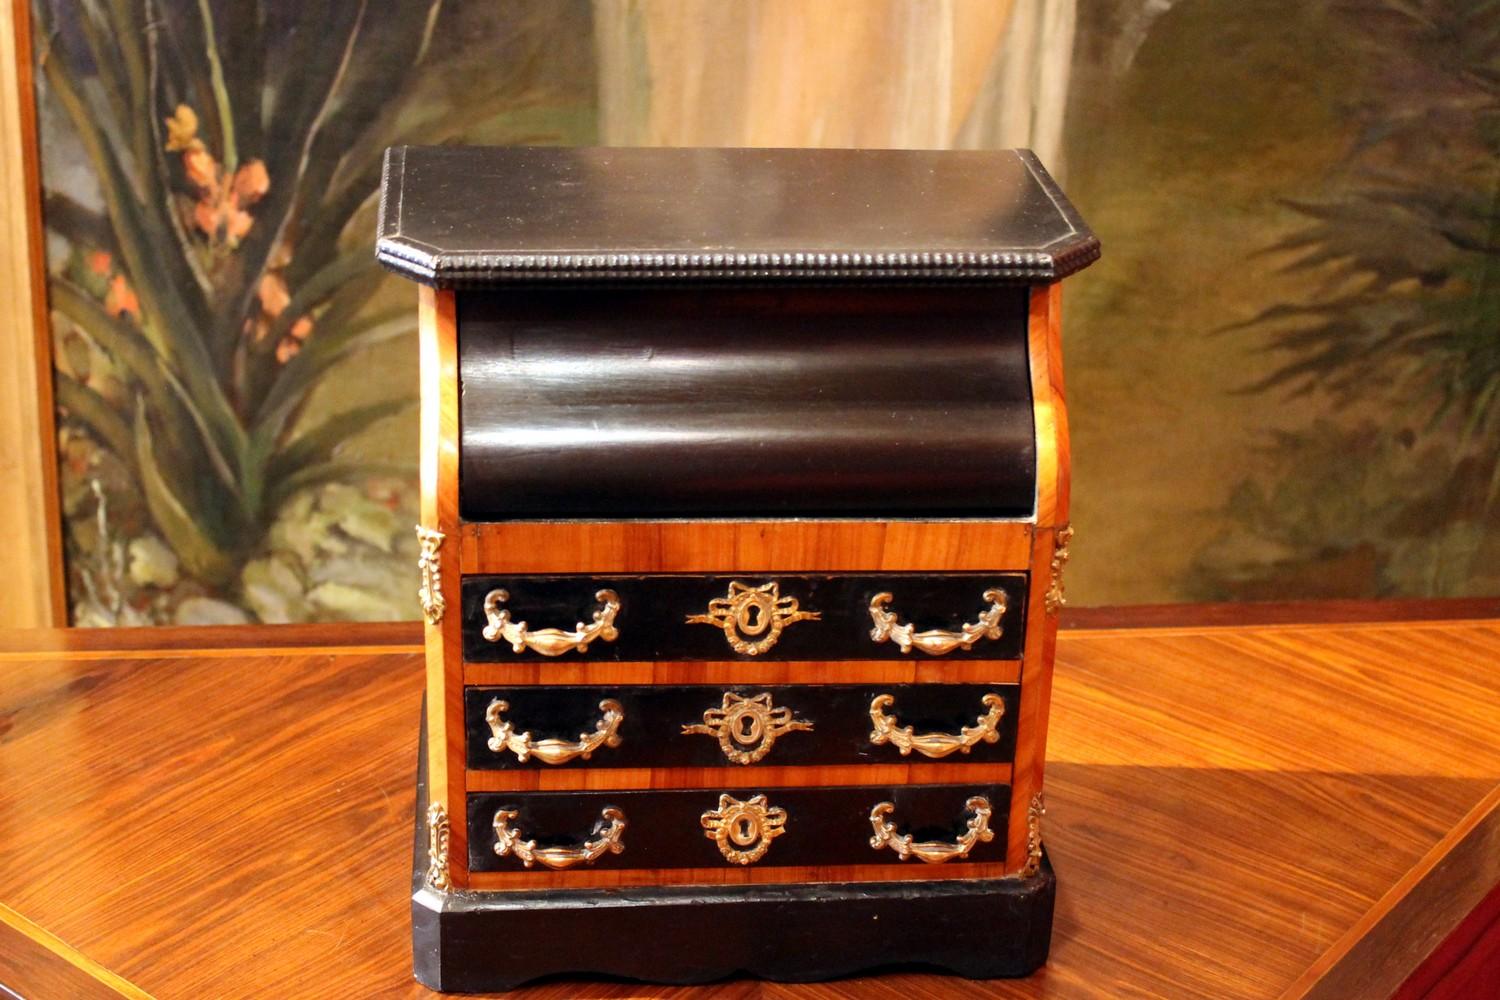 This beautiful French late 19th century chest of drawers in black ebonized wood and cherrywood reproduces with perfect proportions in scale a miniature cabinet with three drawers and an upper flap door that opens to reveal a white marble top and an